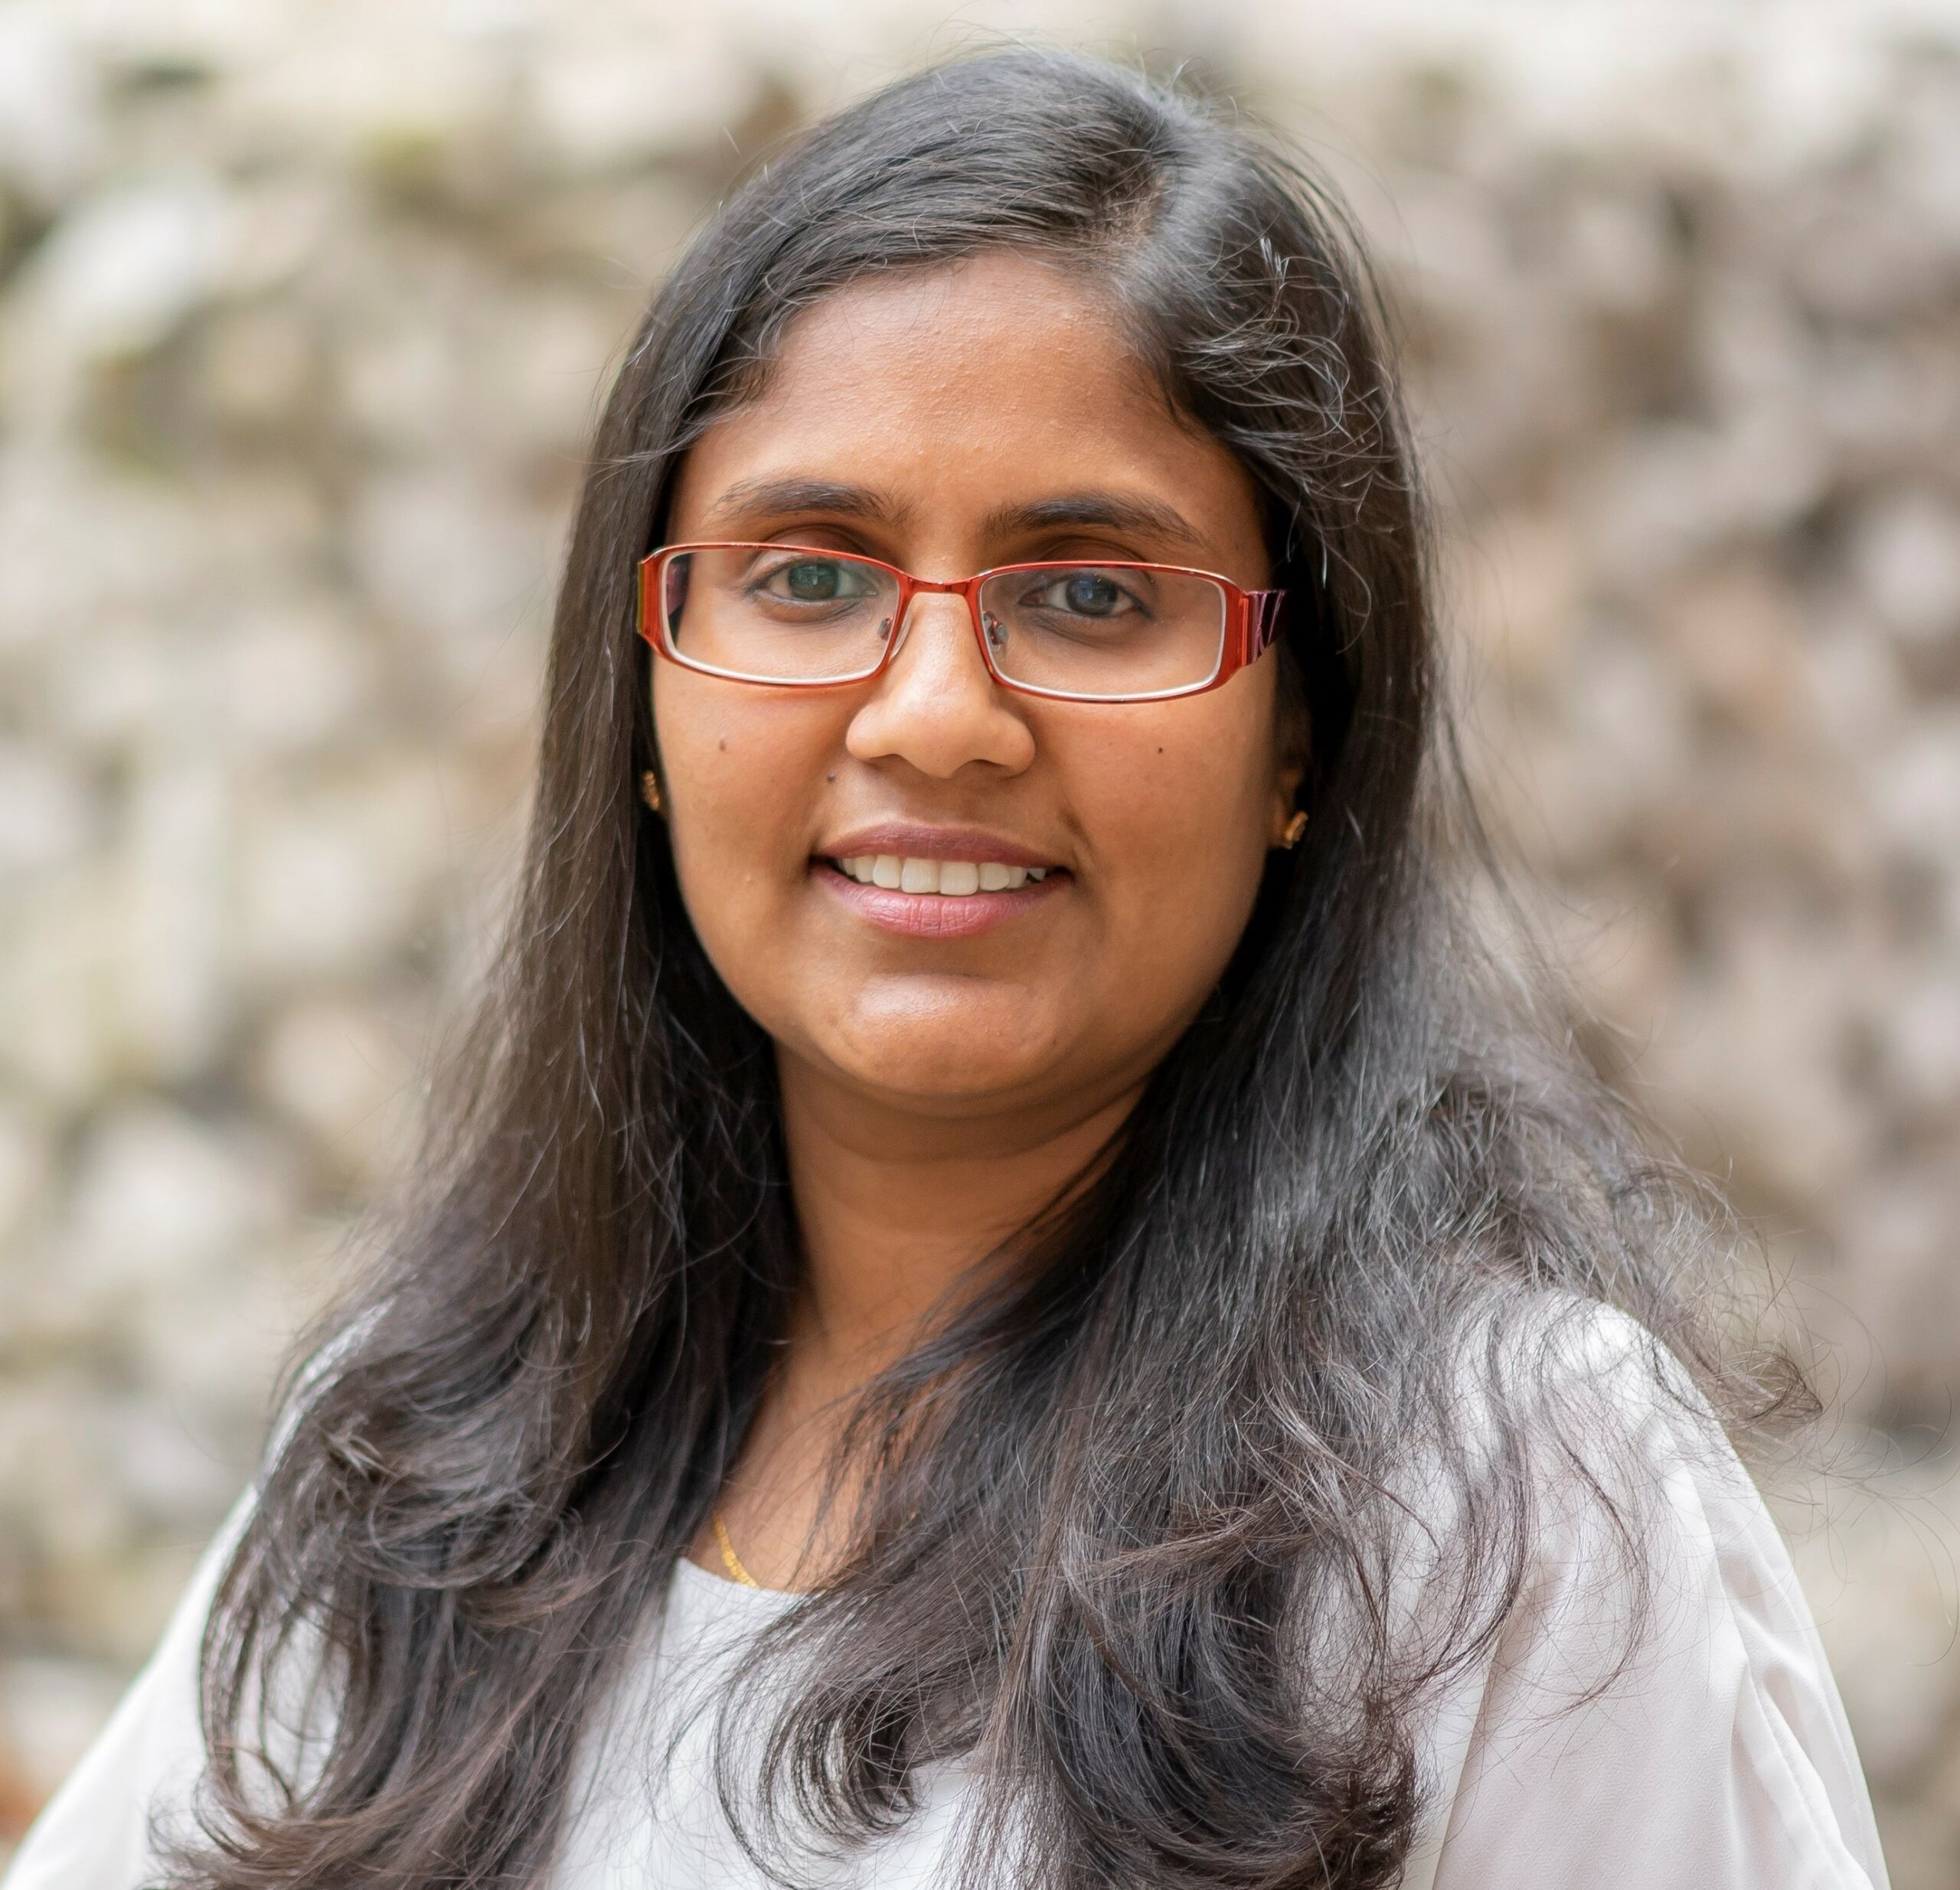 Close cropped head and shoulders profile picture of Dr. Monalie Bandulasena. She is a south asian woman descended woman in her late 30s with shoulder length dark hair and red medium width framed glasses wearing a light grey blouse